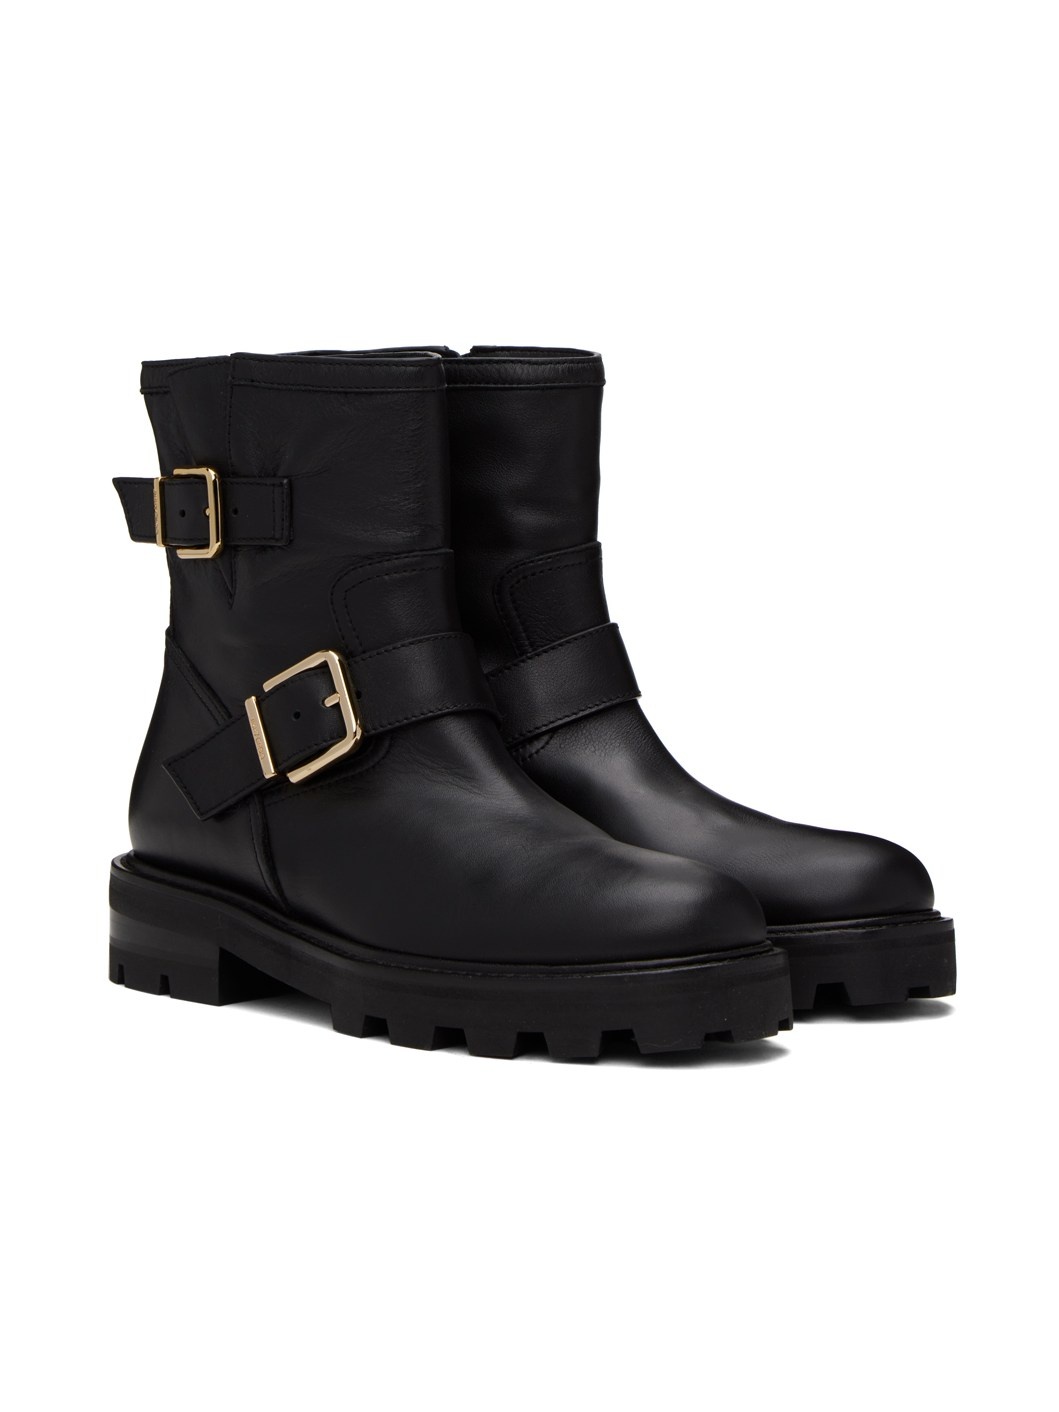 Black Youth II Boots - 4